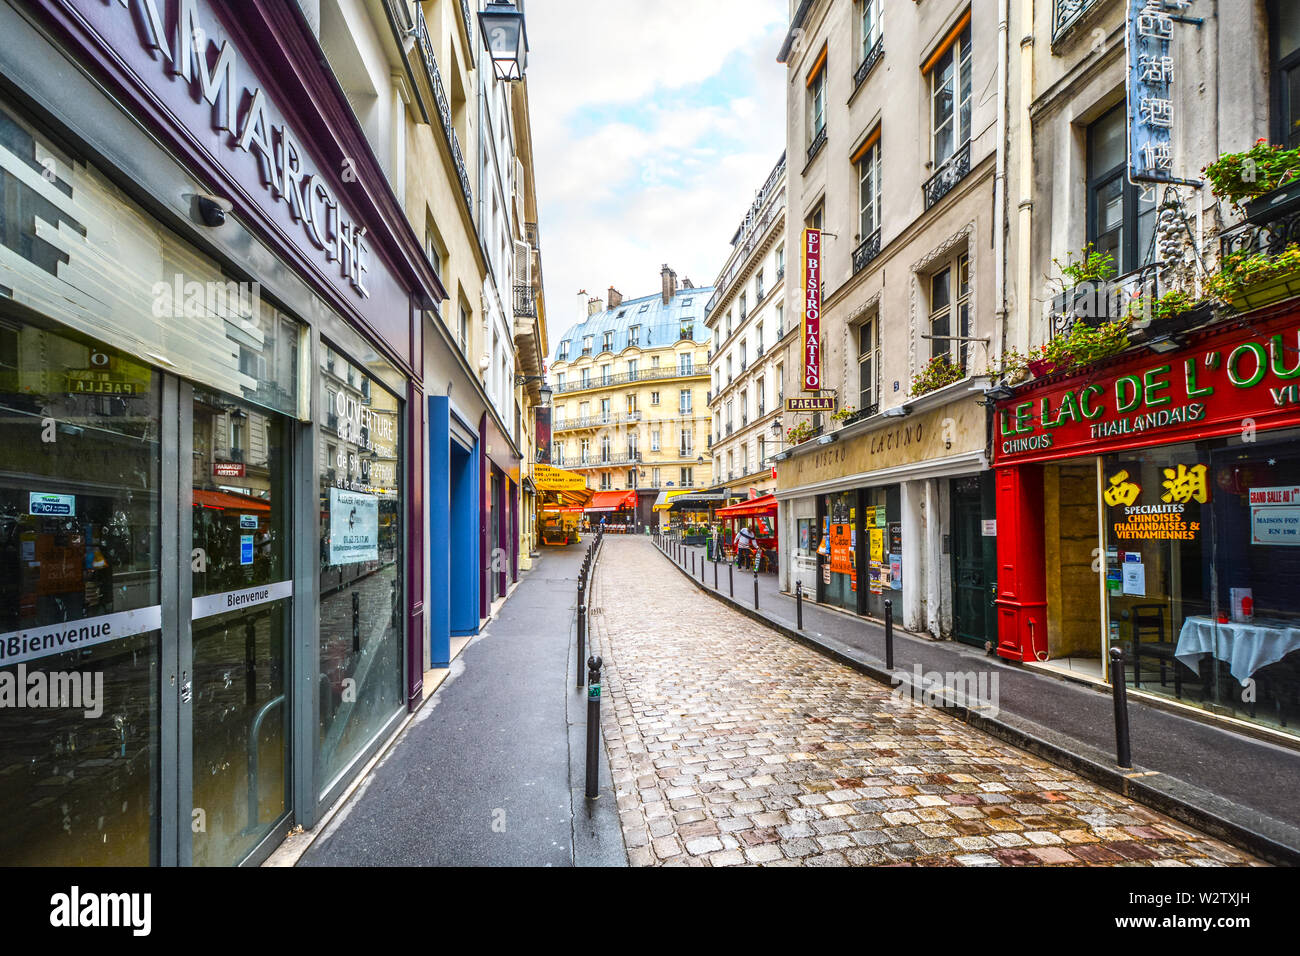 Latin Quarter in the 5th Arrondissement of Paris France early in the morning when the shops and cafes are about to open for business. Stock Photo